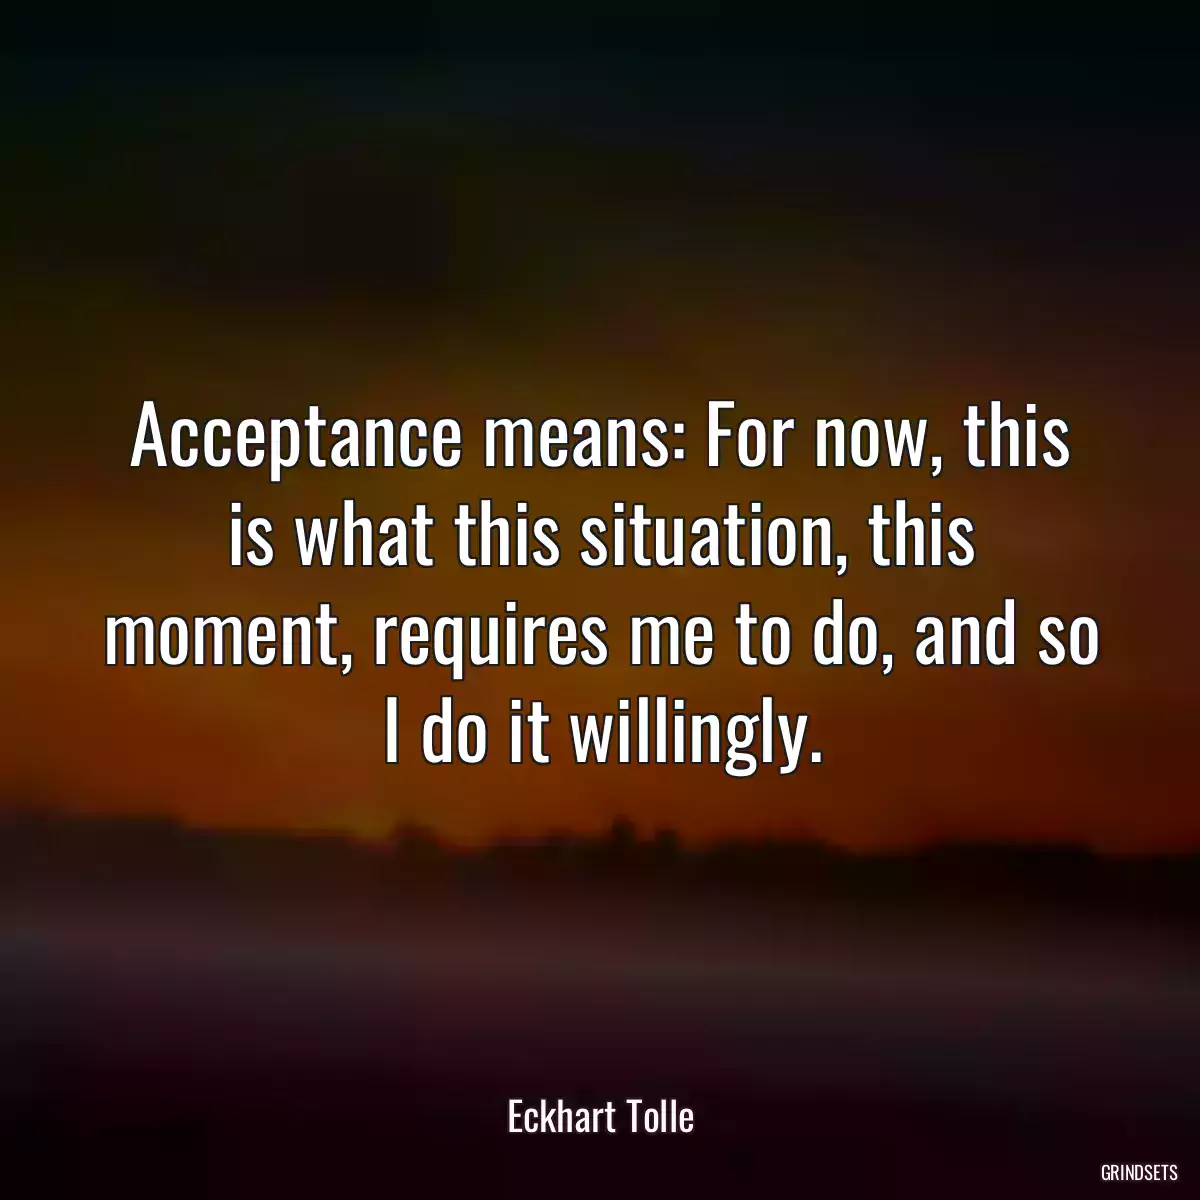 Acceptance means: For now, this is what this situation, this moment, requires me to do, and so I do it willingly.